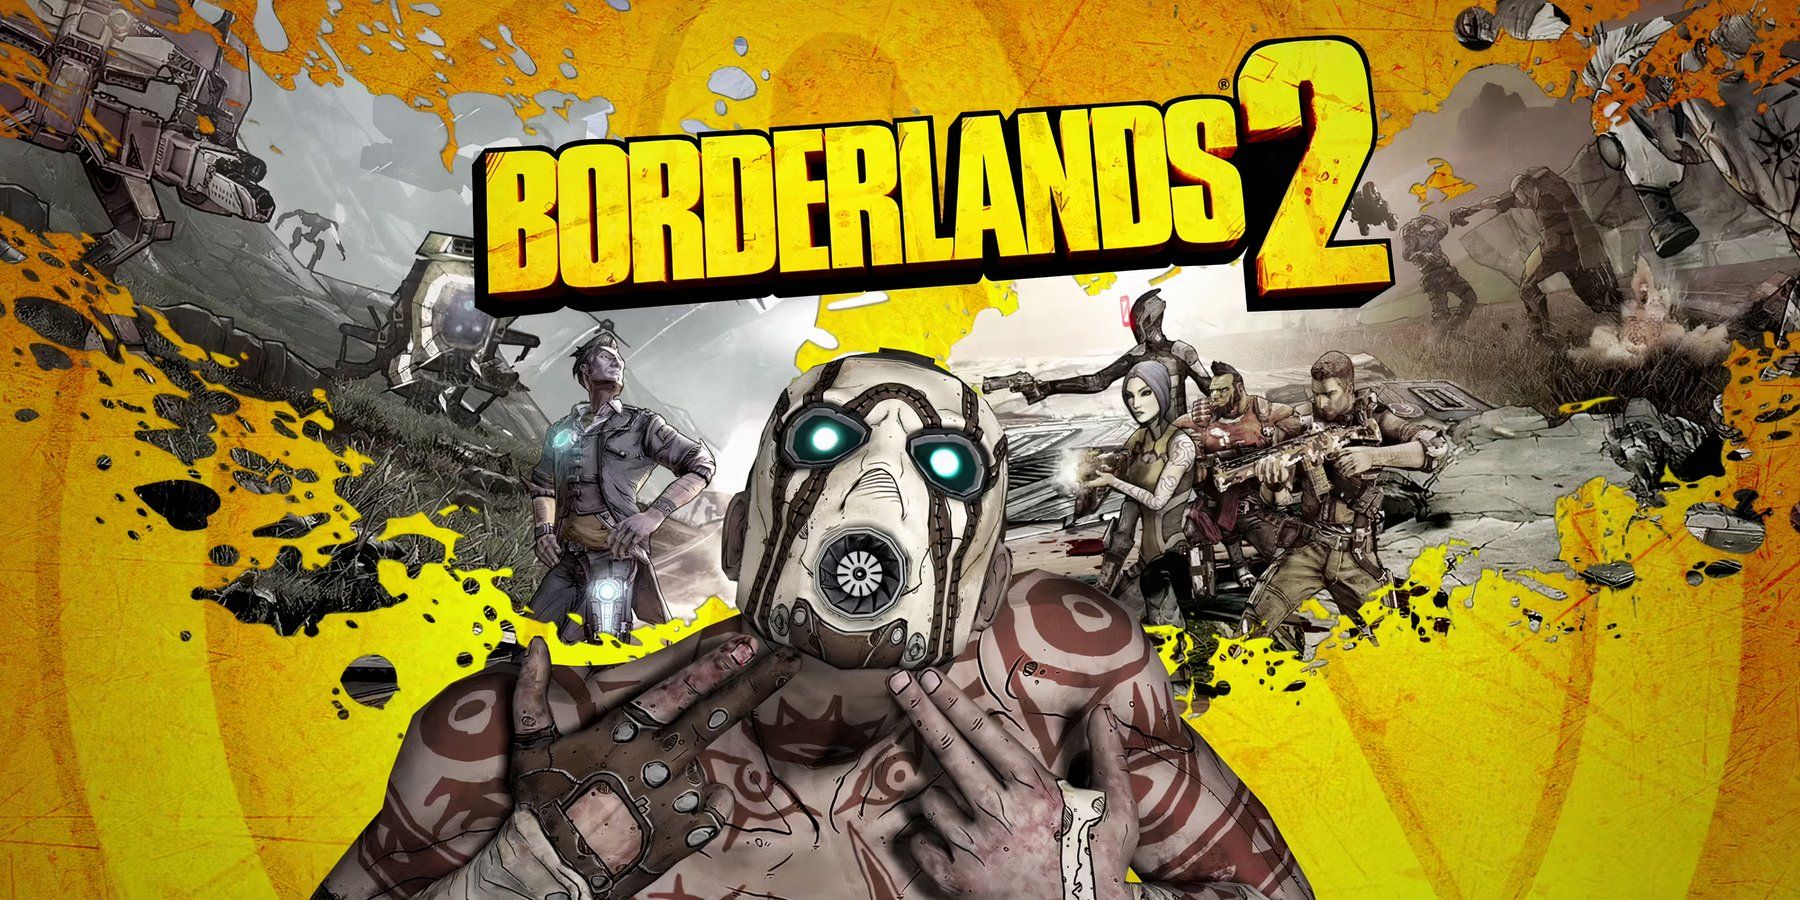 Psycho on the poster for Borderlands